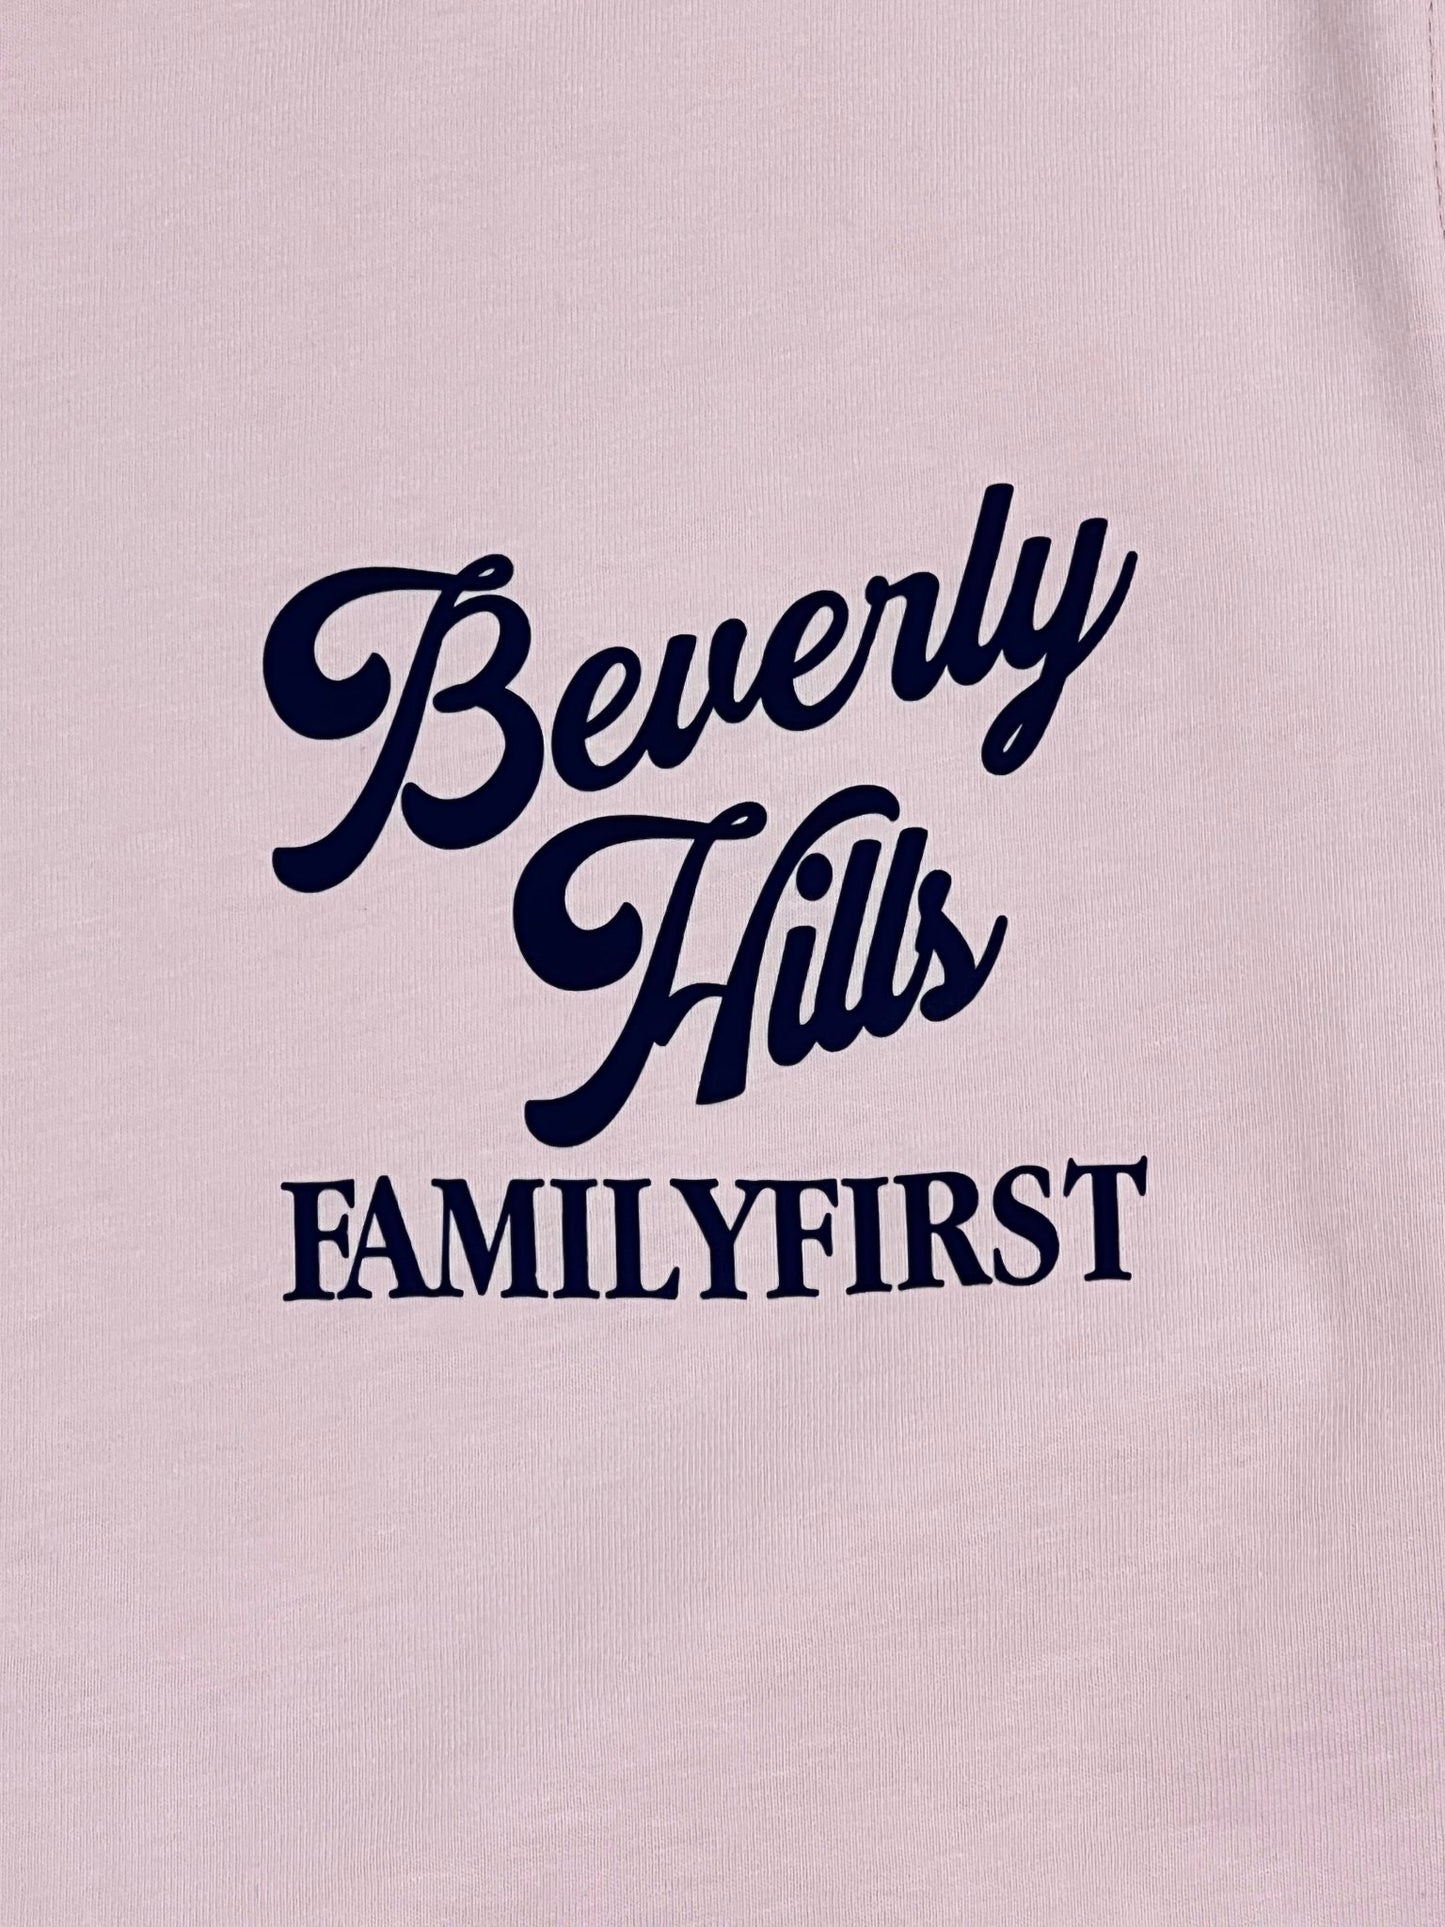 Probus FAMILY FIRST TS2415 T-SHIRT BEVERLY HILLS PK FAMILY FIRST TS2415 T-SHIRT BEVERLY HILLS PK PINK